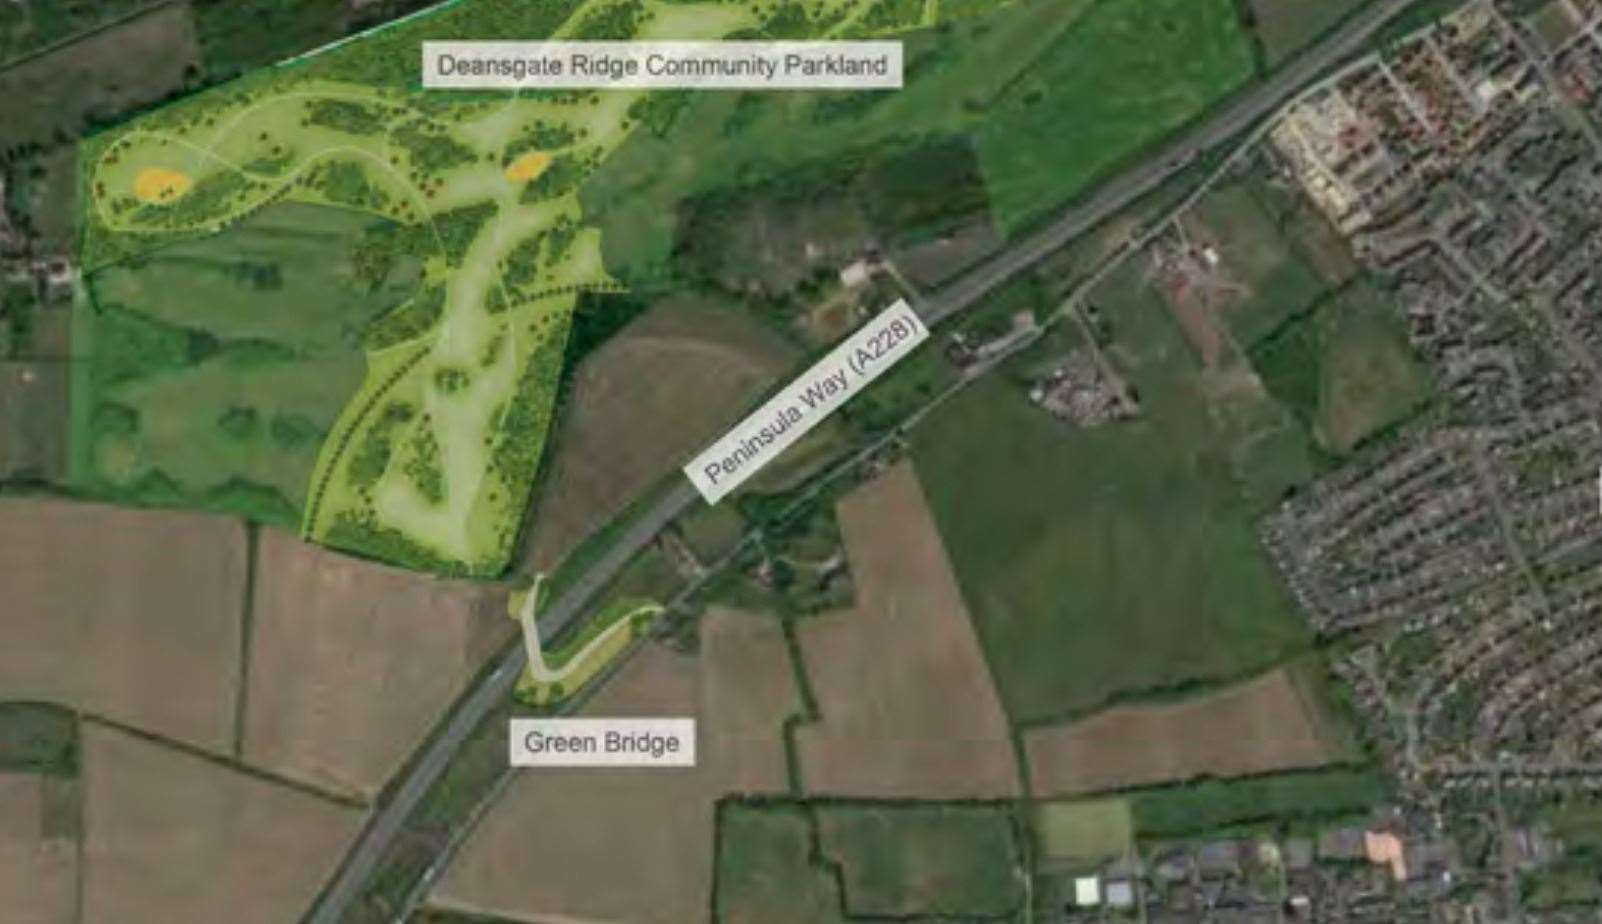 An aerial impression of the green bridge over the A228 in Hoo, also showing the area which could become the Deangate Community Parkland in bright green. Picture: Medway Council